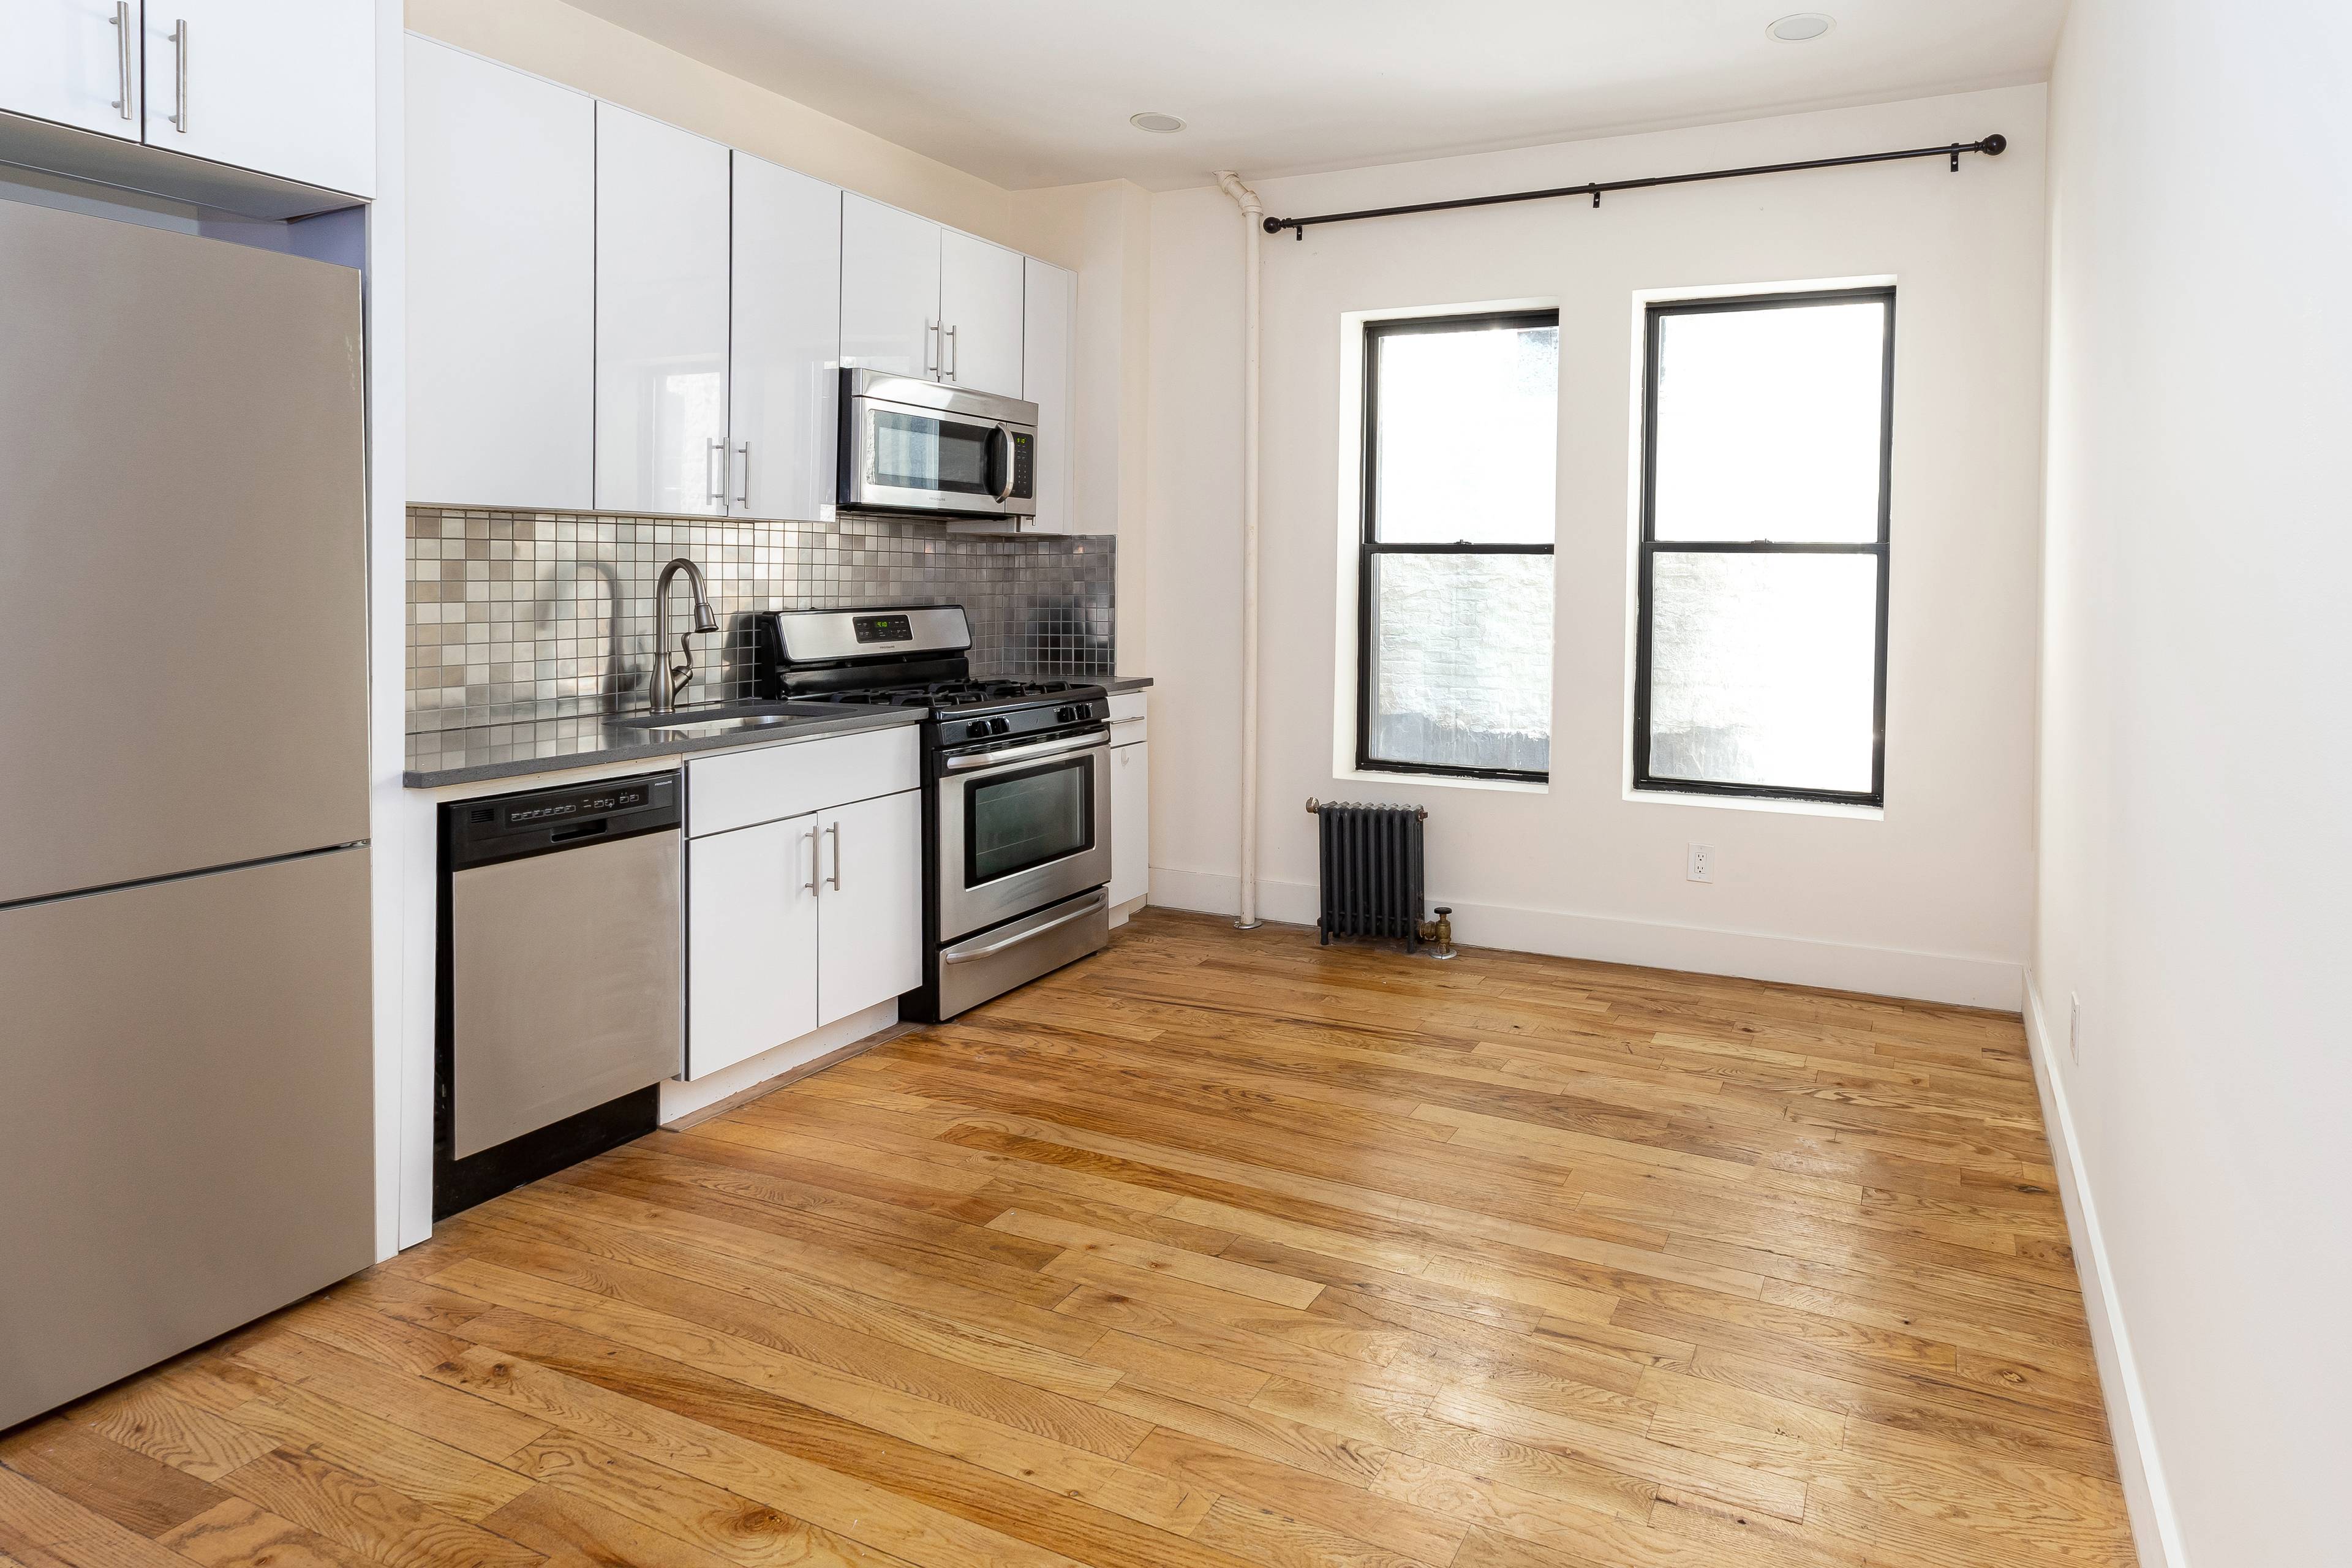 Beautiful Three Bed Two Bath apartment in the heart of Prospect Lefferts Garden with easy access to Manhattan via the Q Train.